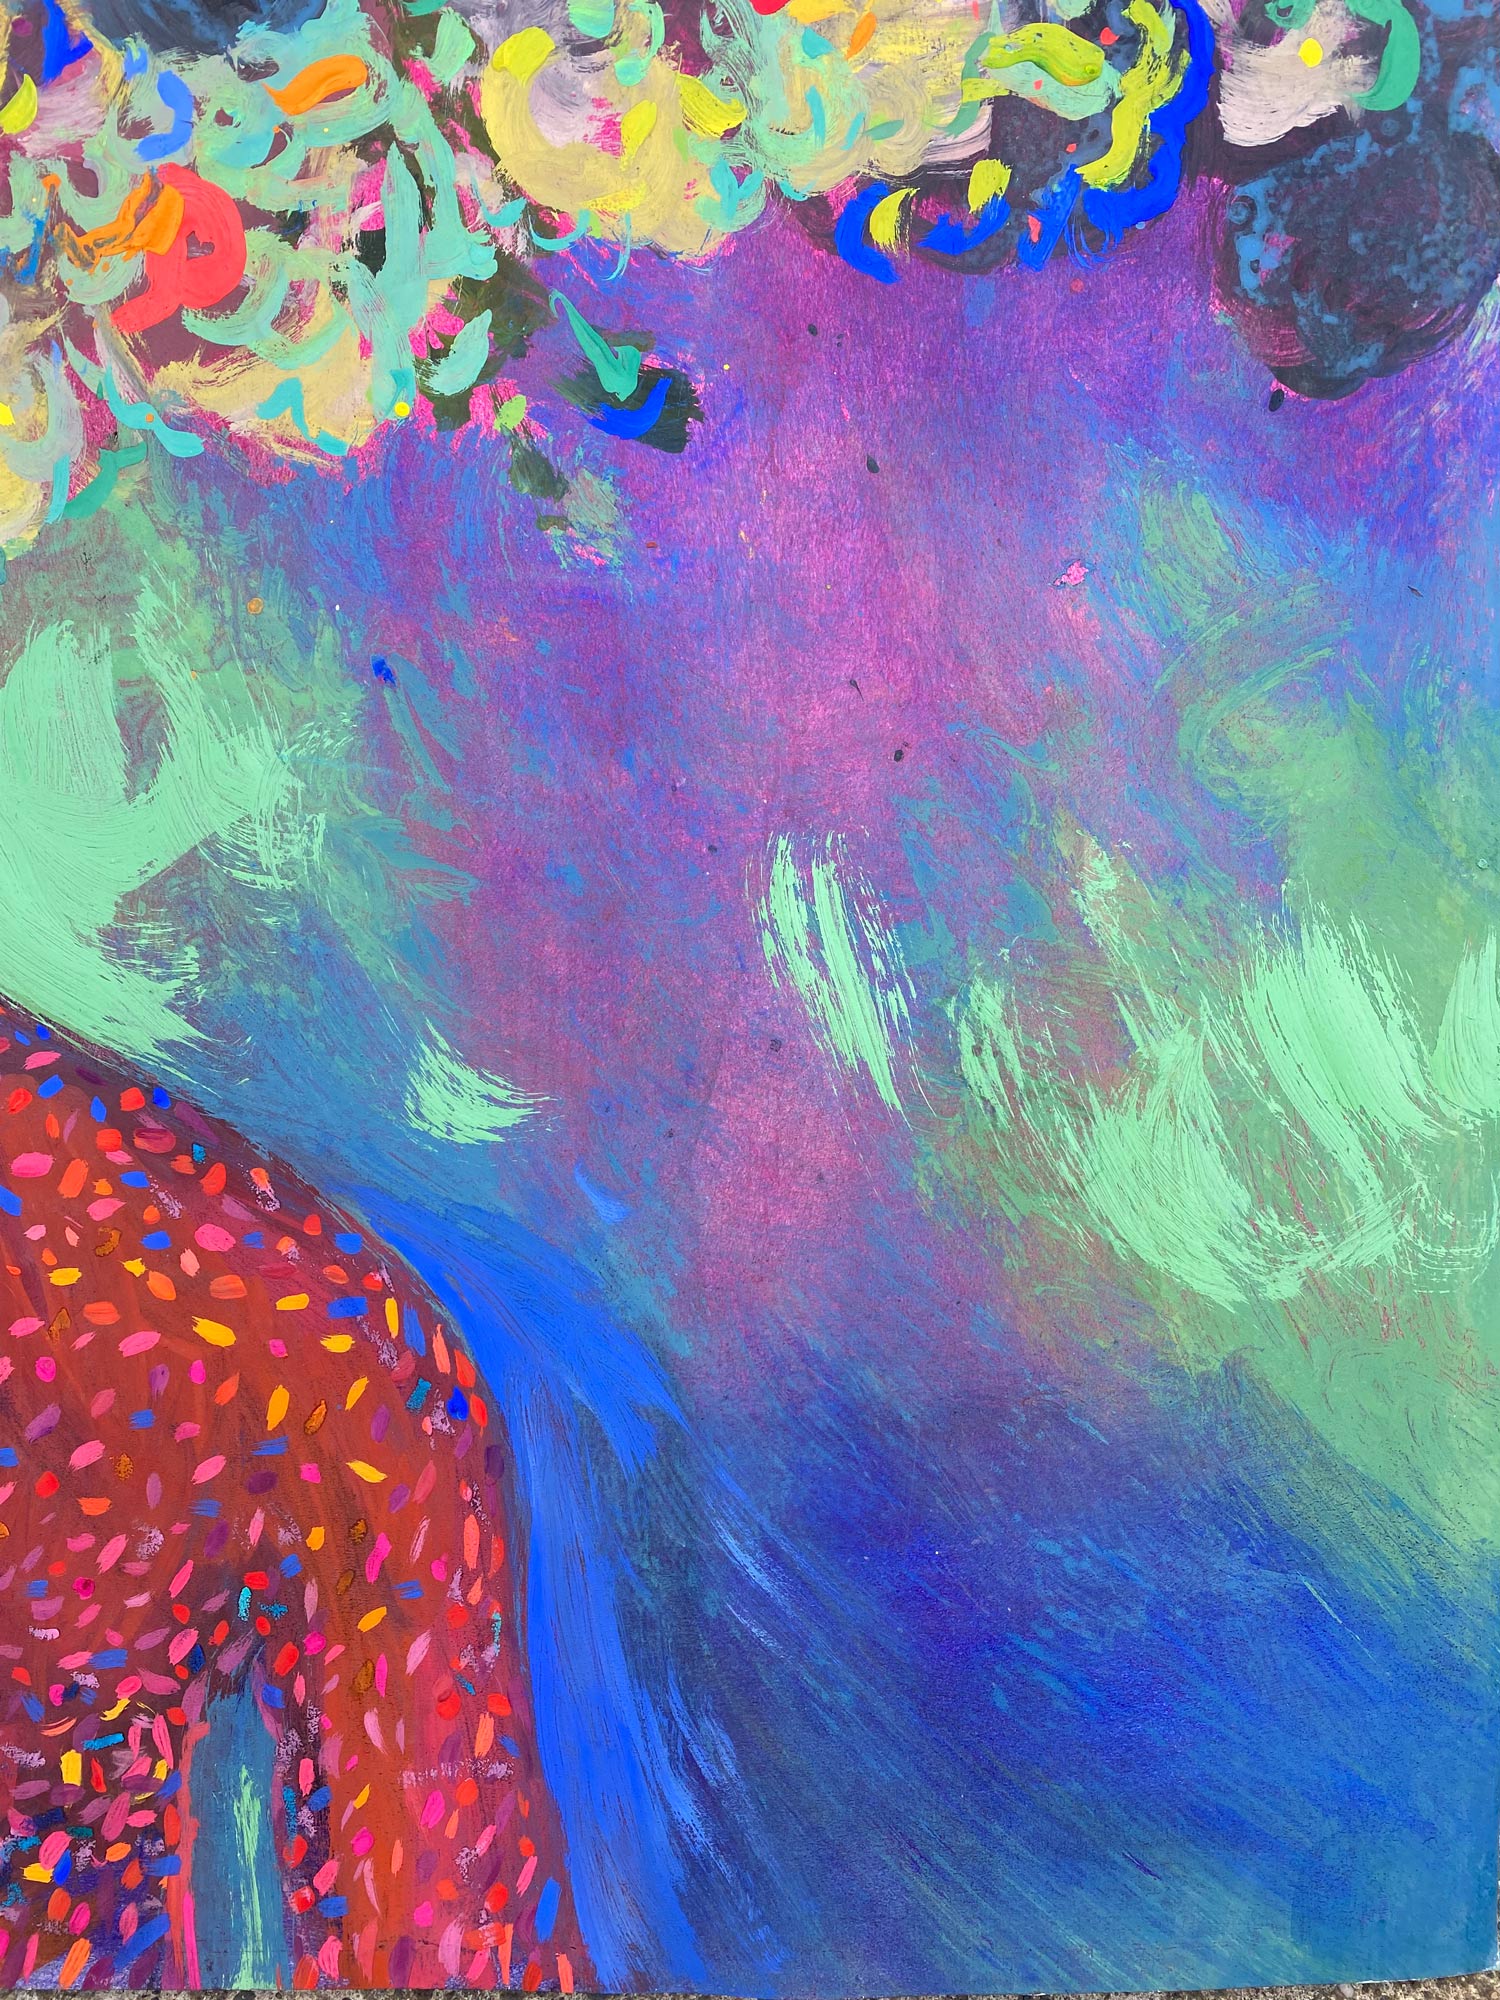 Morning. Close-up detail of the artwork